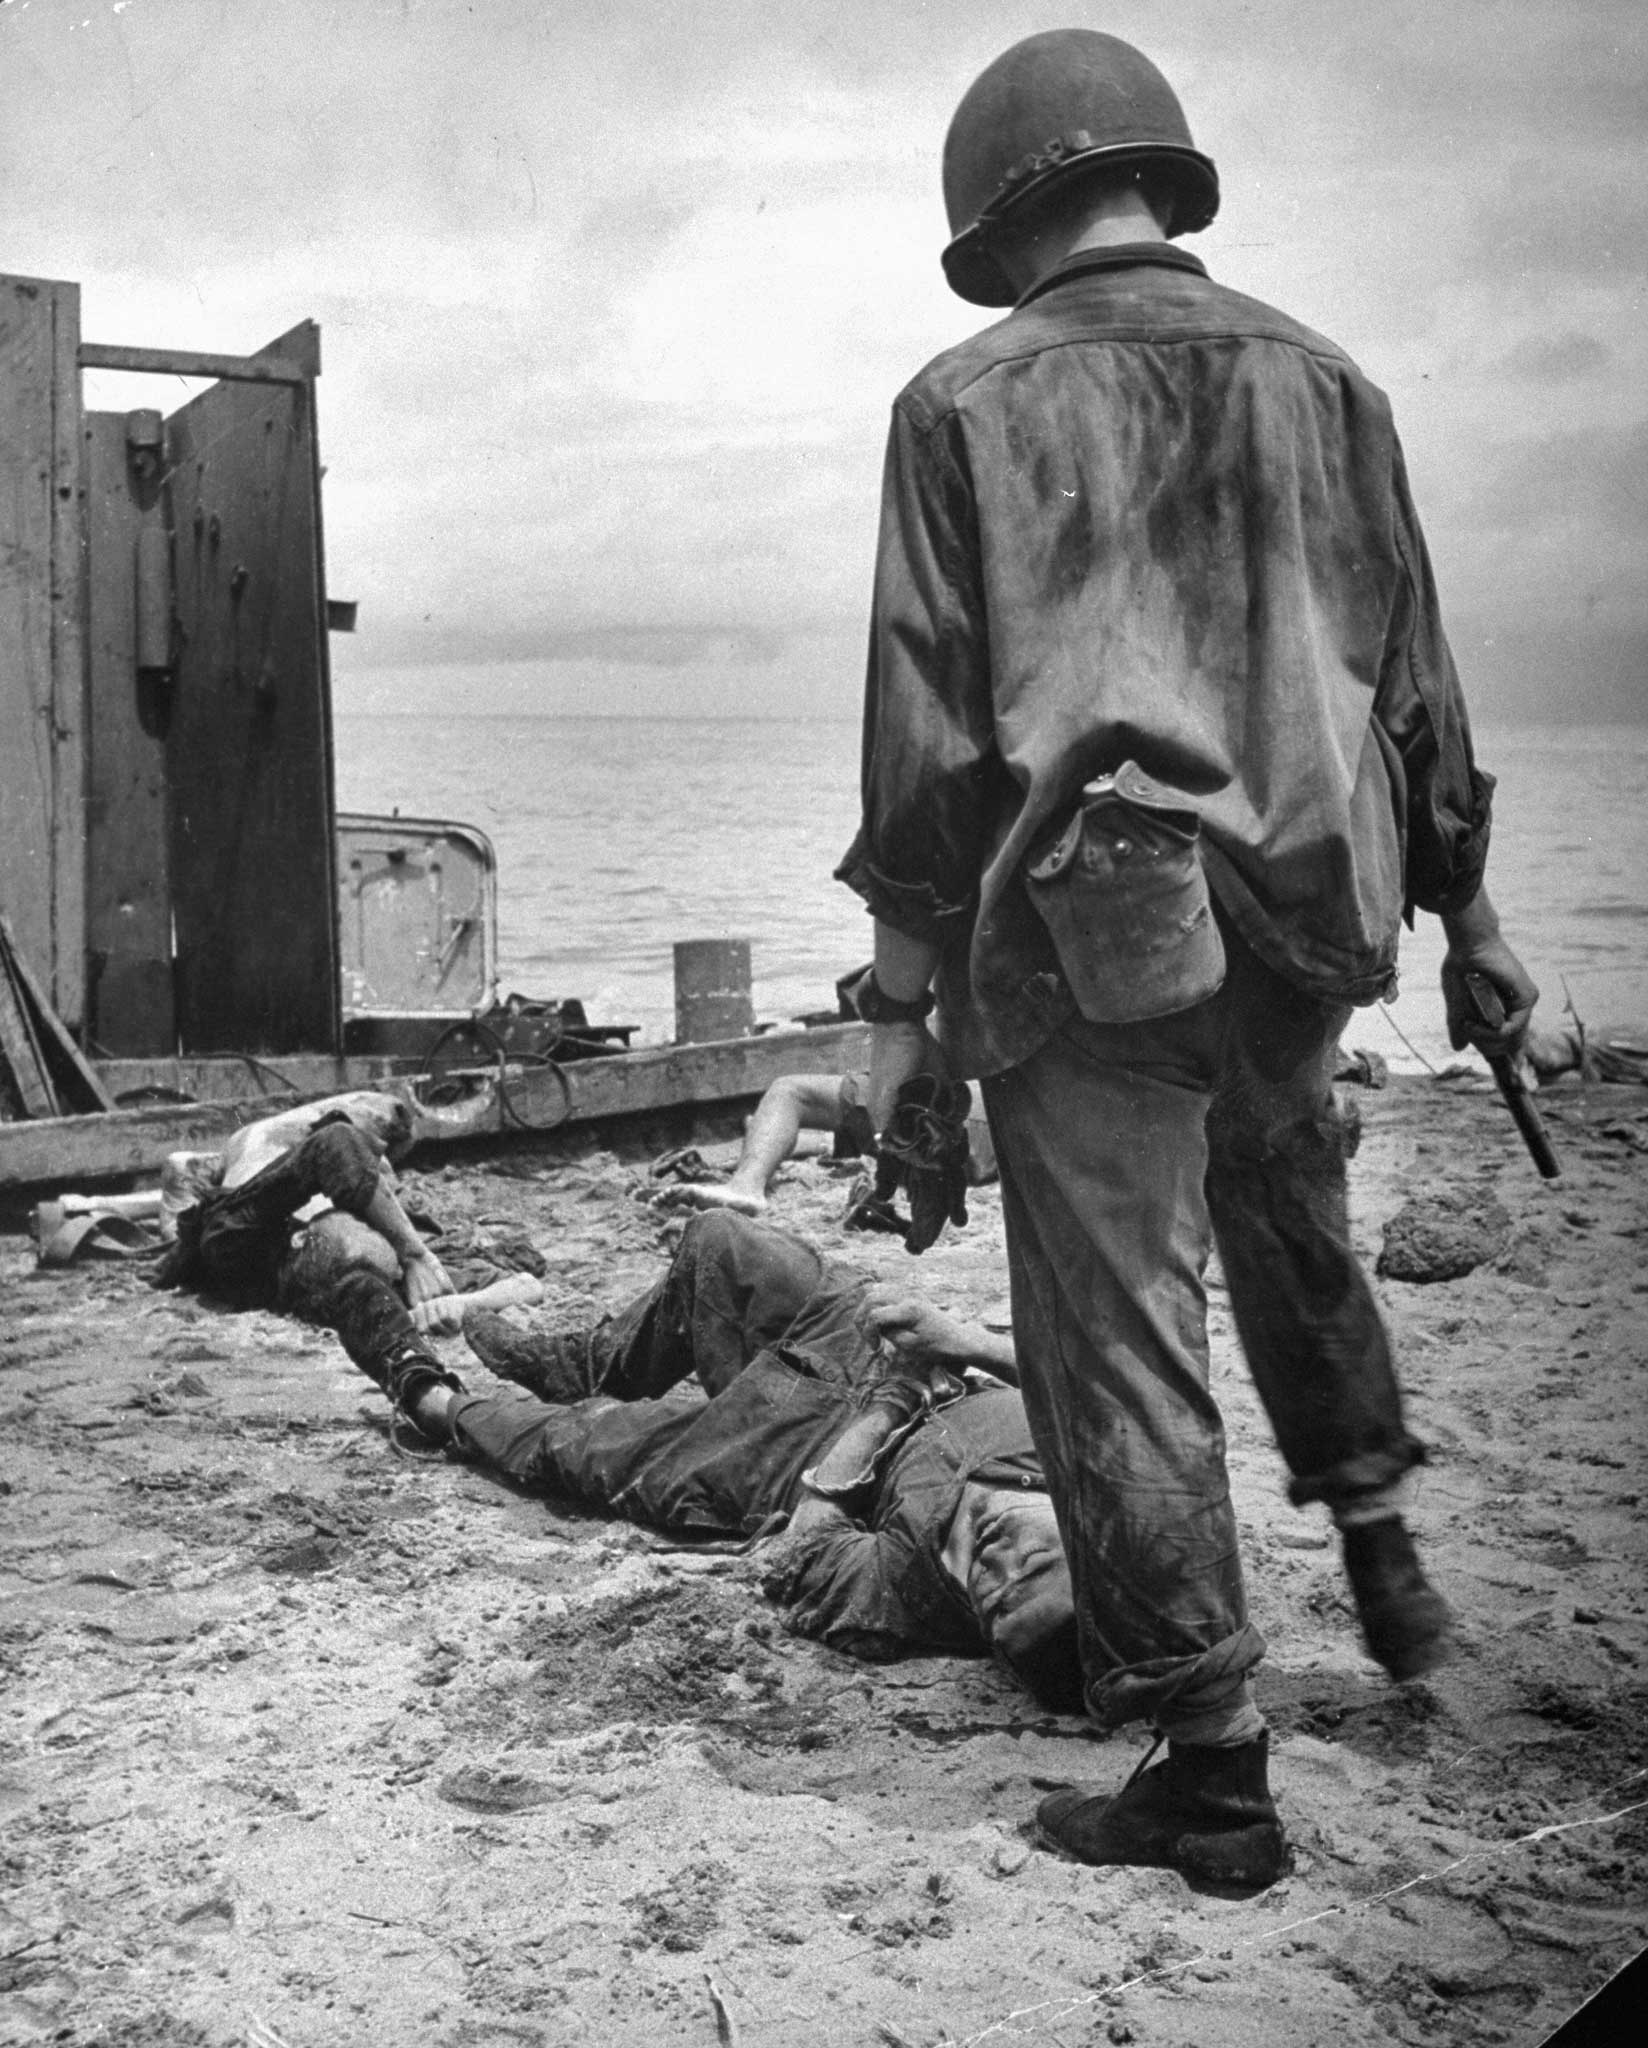 "An American soldier stands over a dying Jap whom he has just been forced to shoot. The Jap had been hiding in the landing barge, shooting at U.S. troops." New Guinea Campaign, 1942.